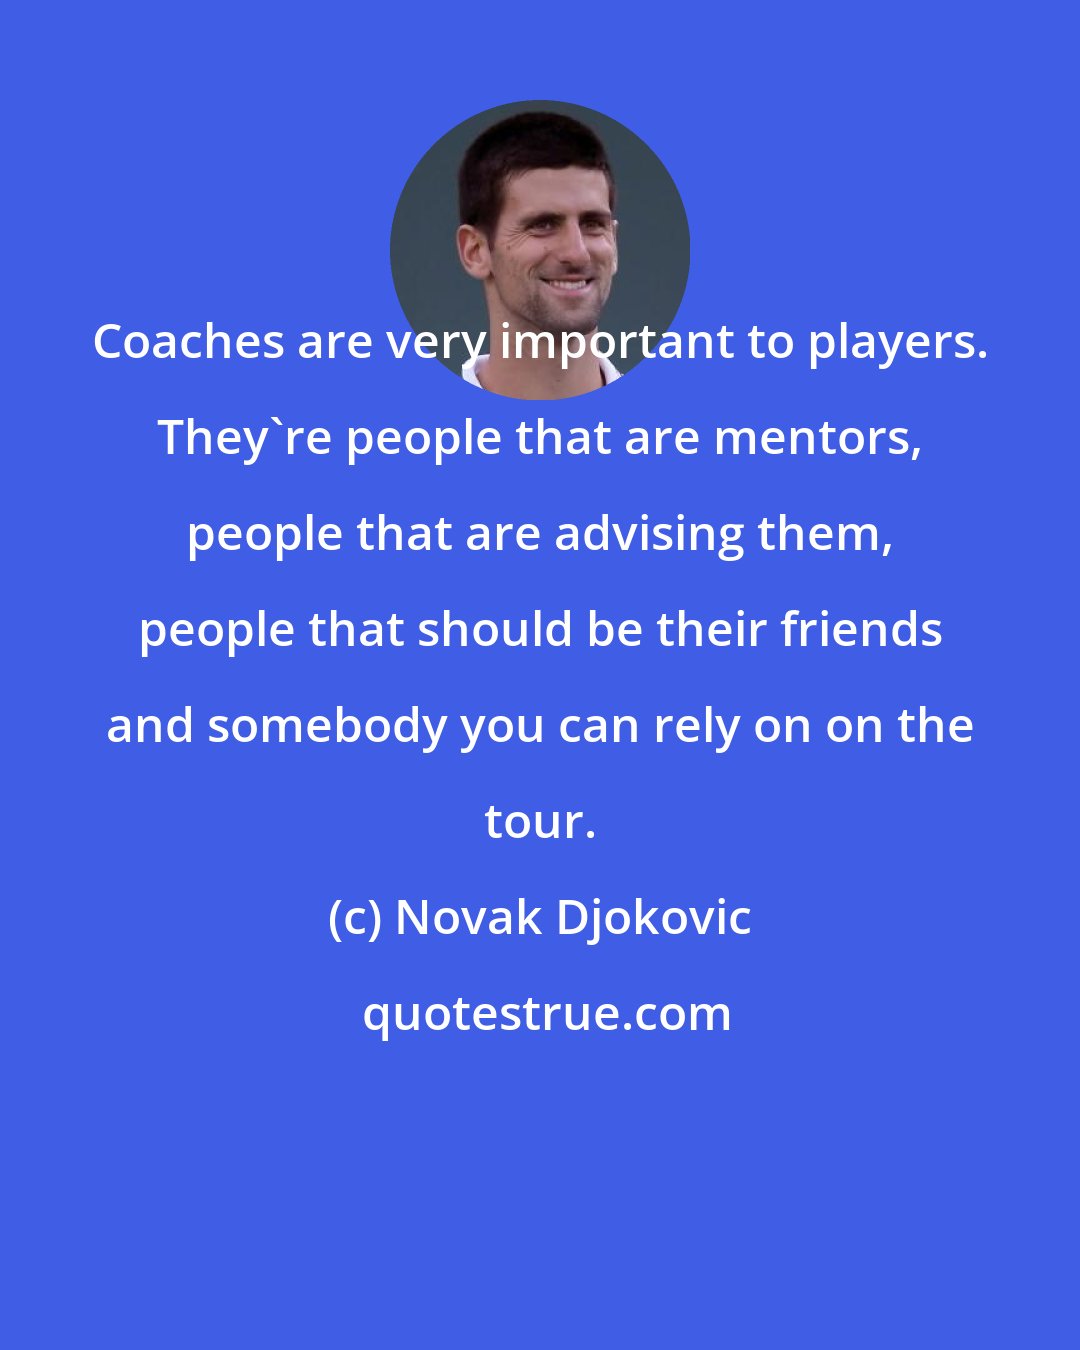 Novak Djokovic: Coaches are very important to players. They're people that are mentors, people that are advising them, people that should be their friends and somebody you can rely on on the tour.